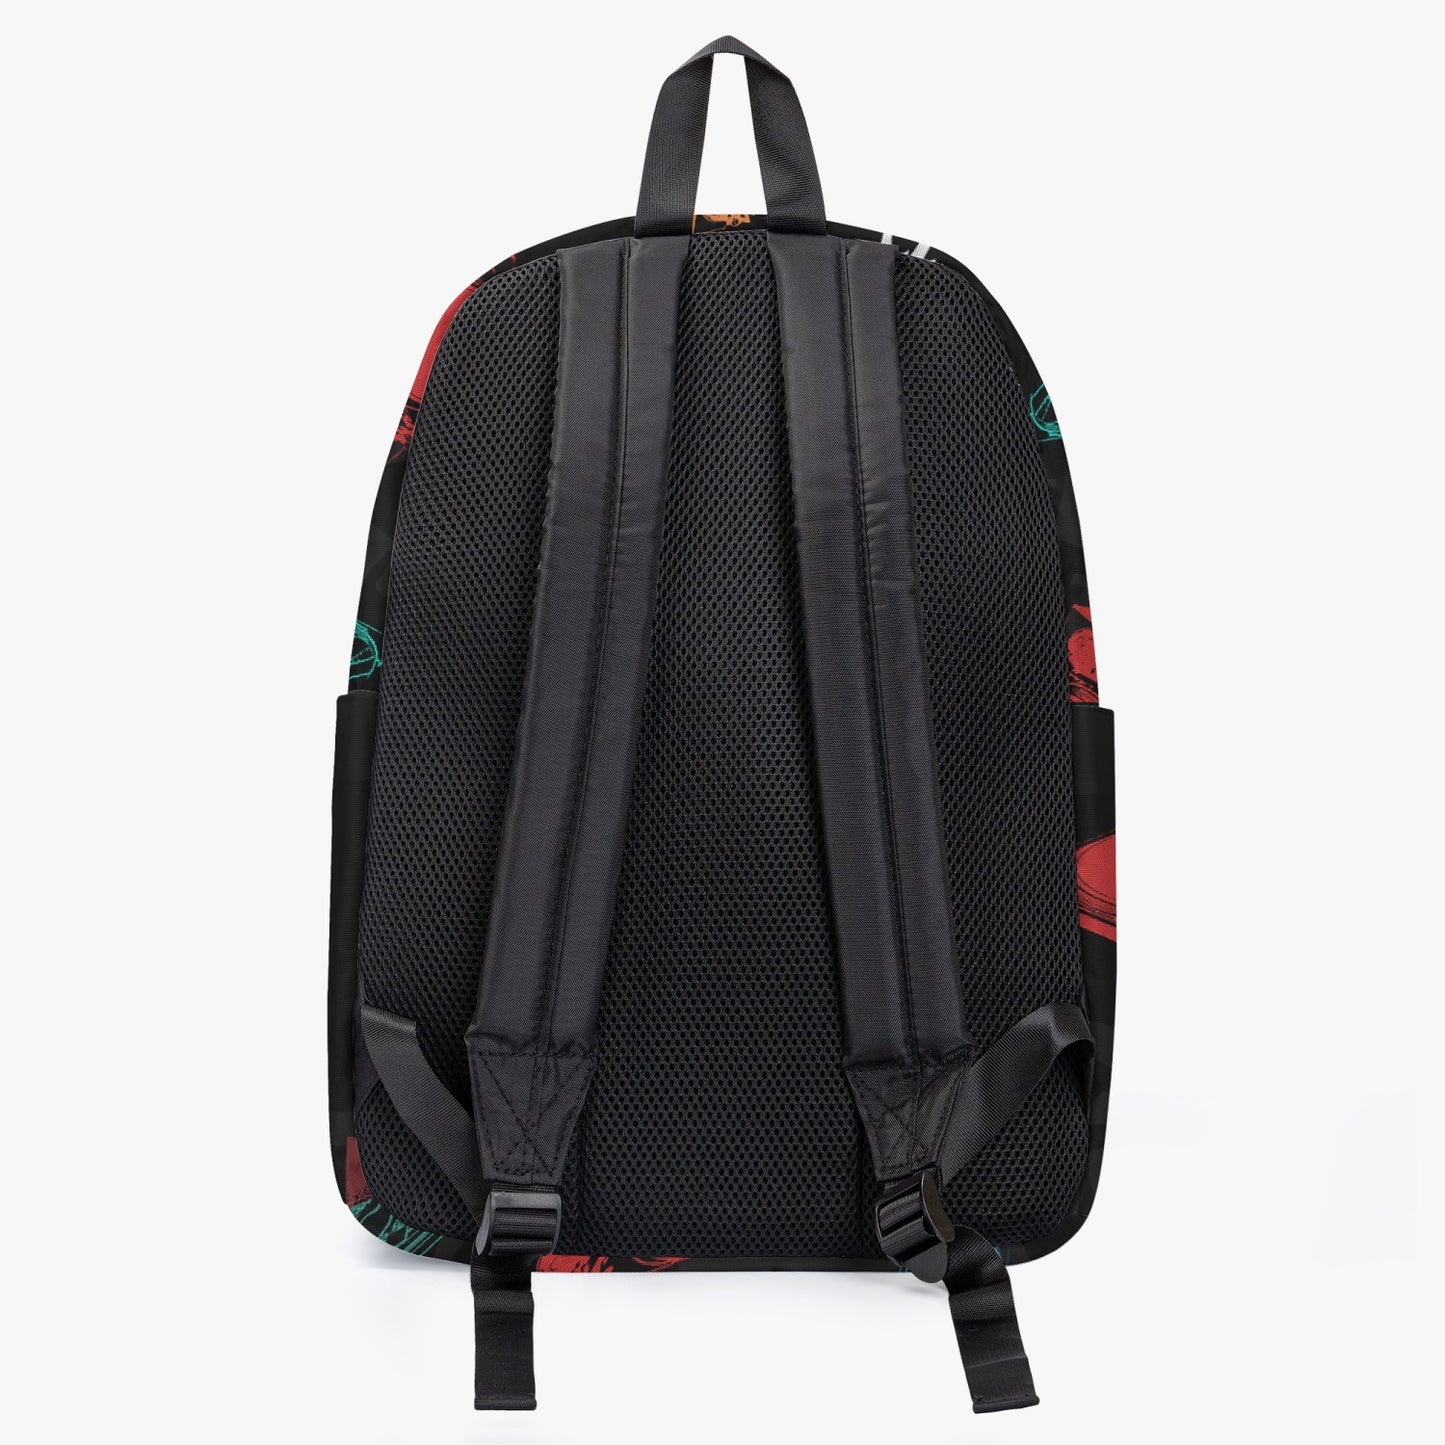 THE TURNTABLE CANVAS BACKPACK